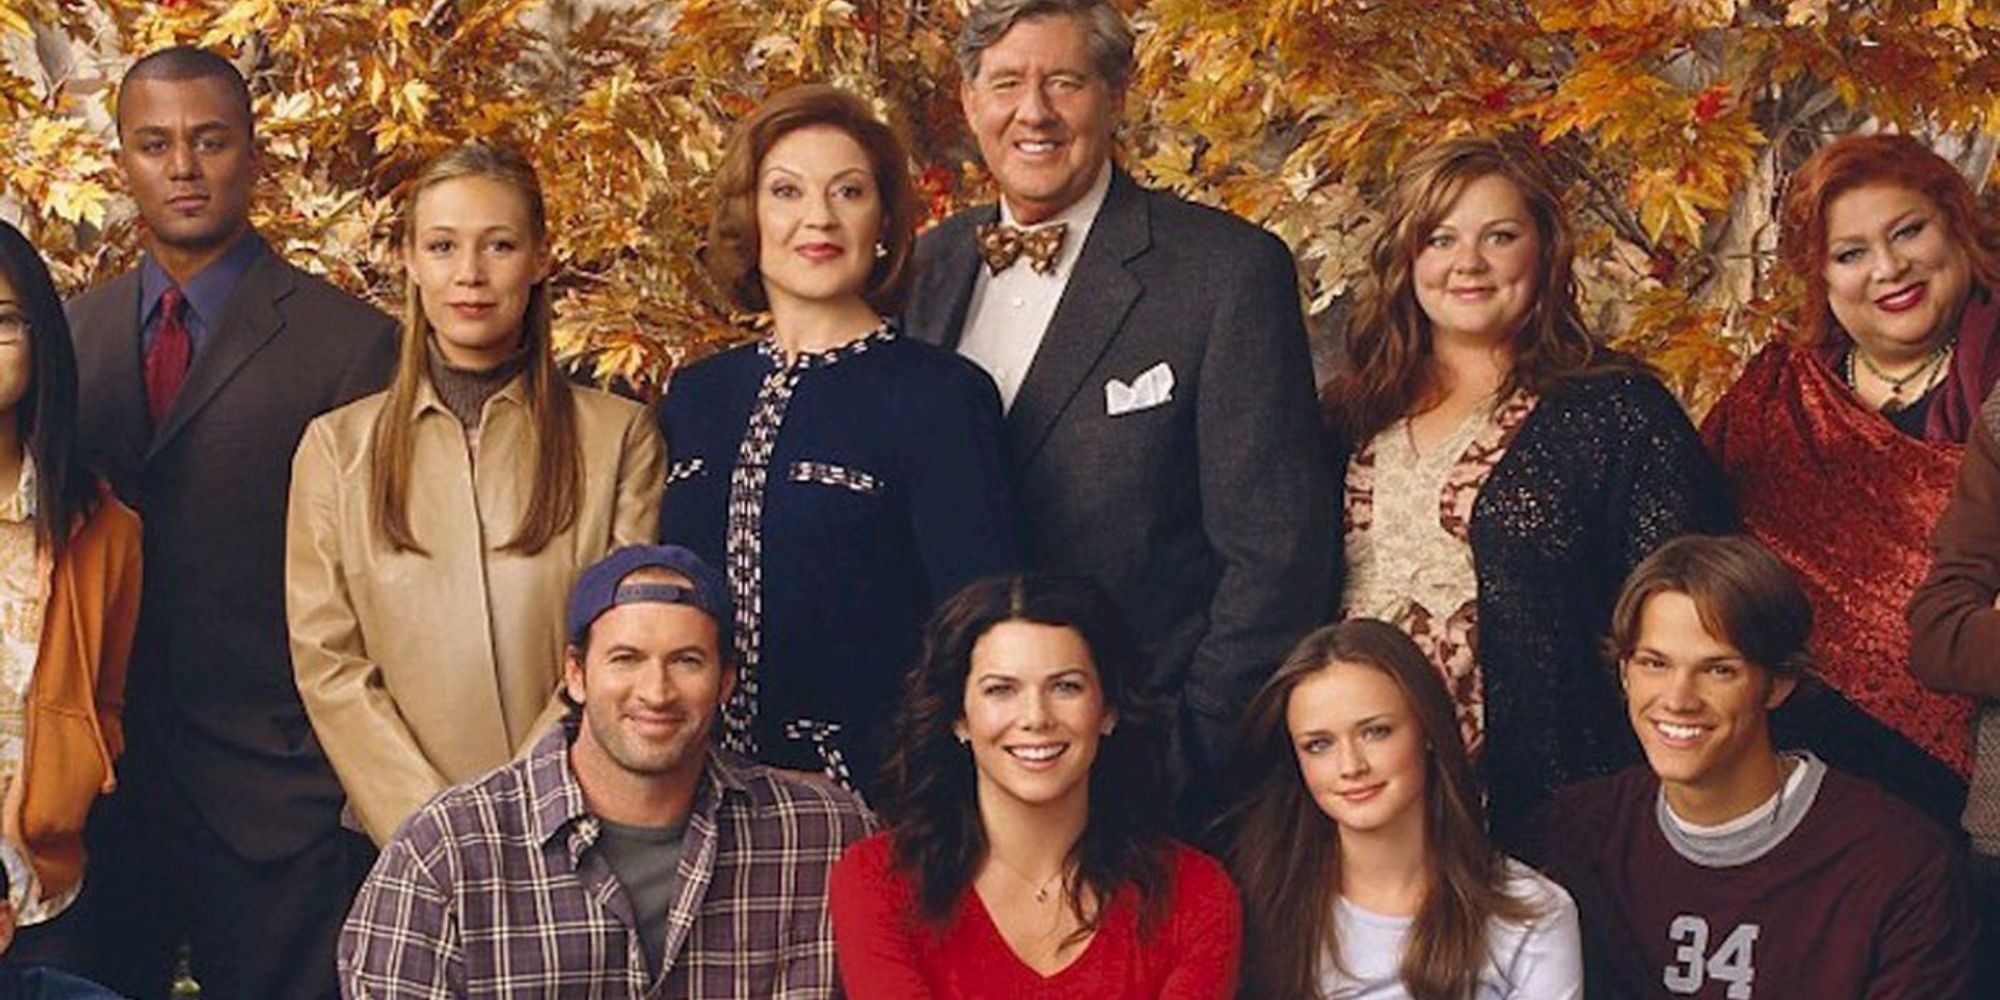 The cast of Gilmore Girls standing together